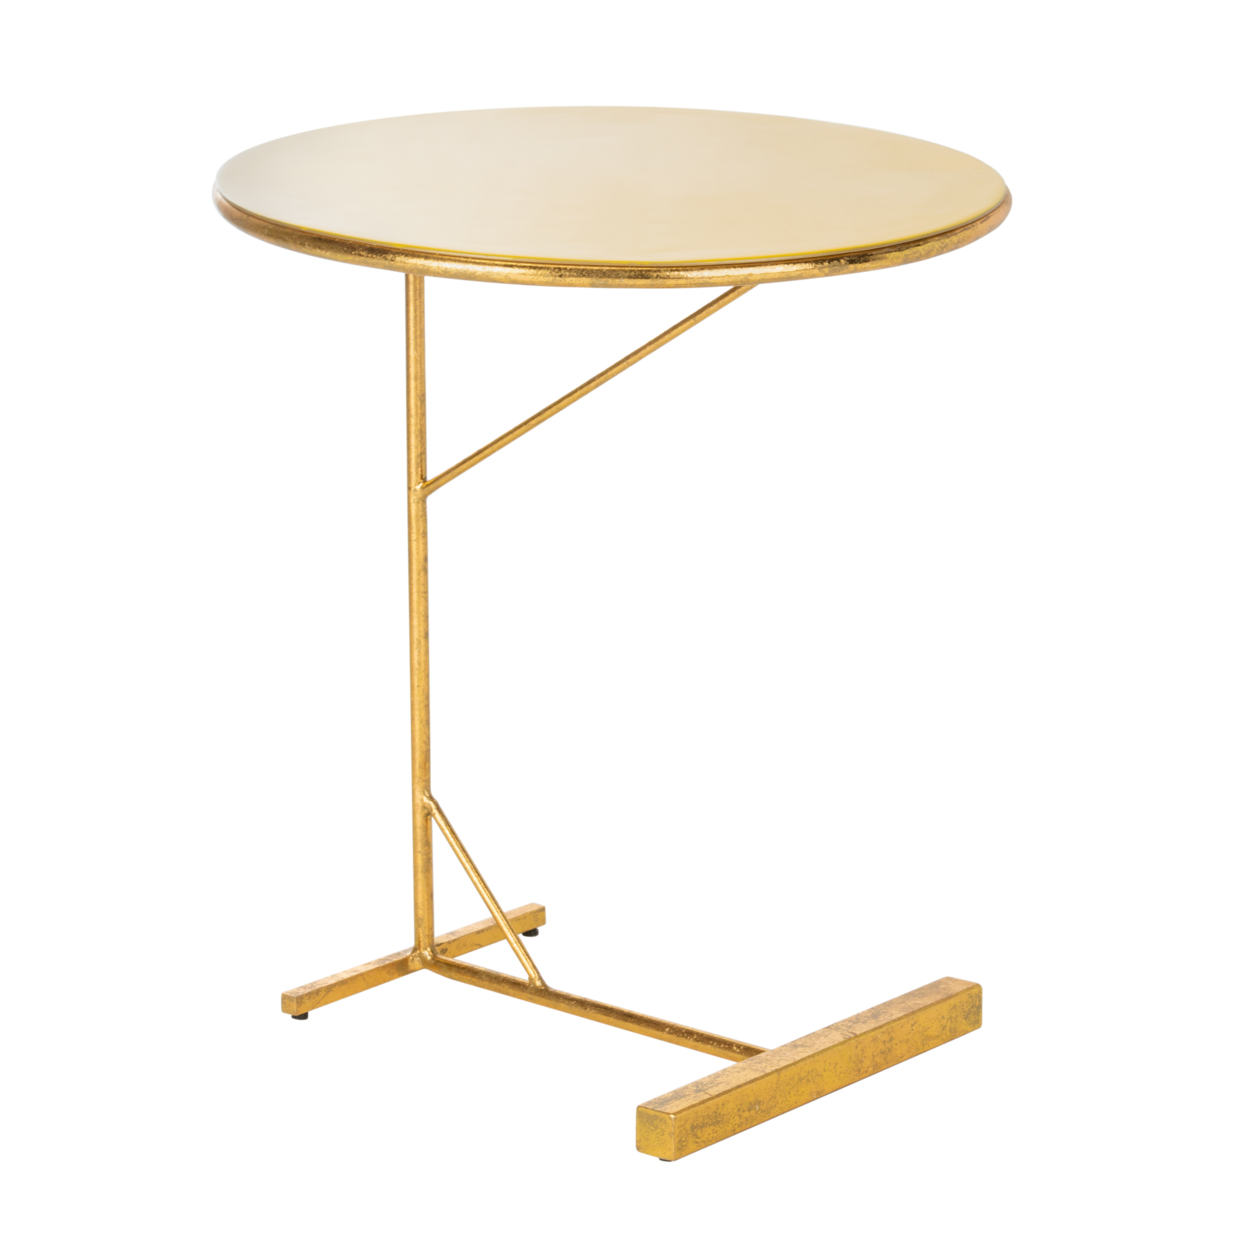 SAFAVIEH Sionne Round C Table Yellow / Gold